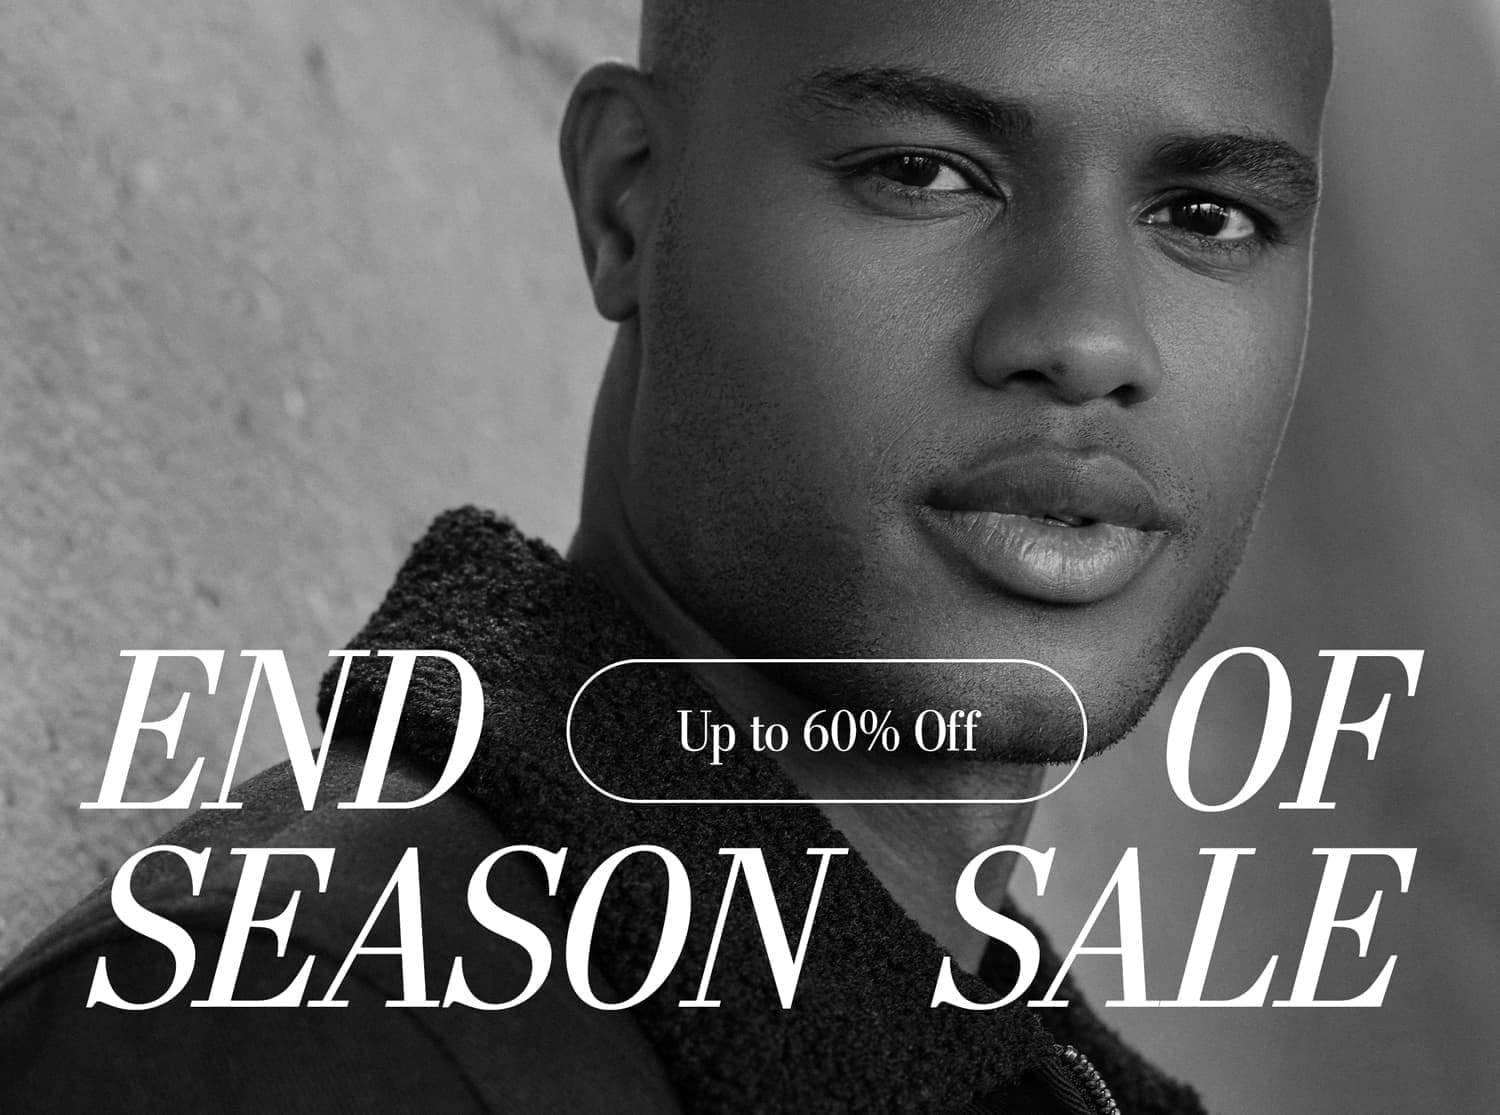 END OF SEASON SALE. UP TO 60% OFF